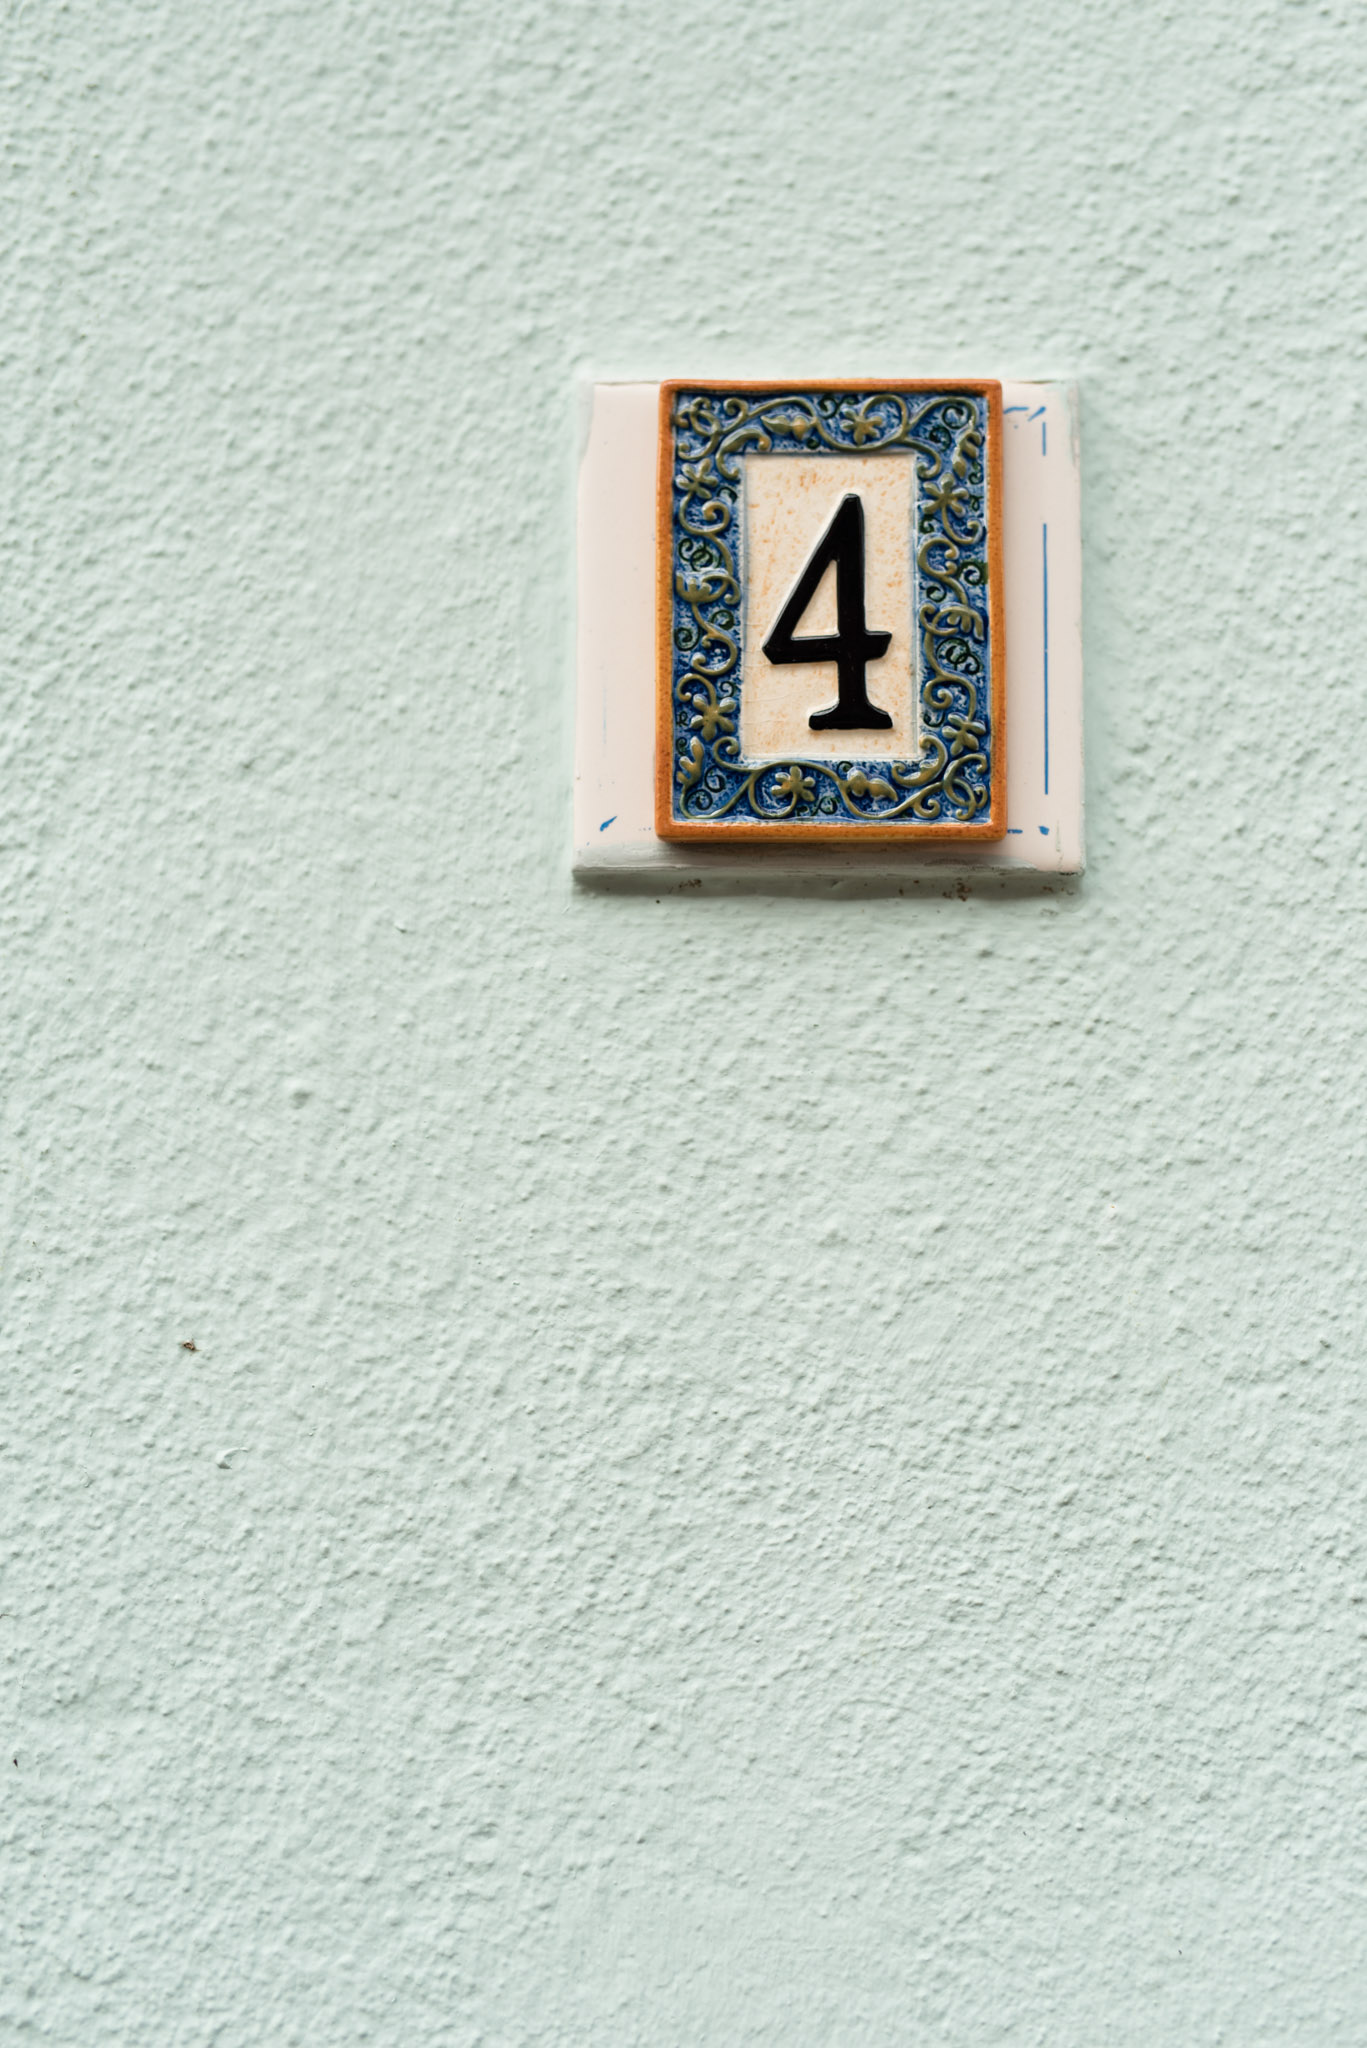 Number "4" decorated tile